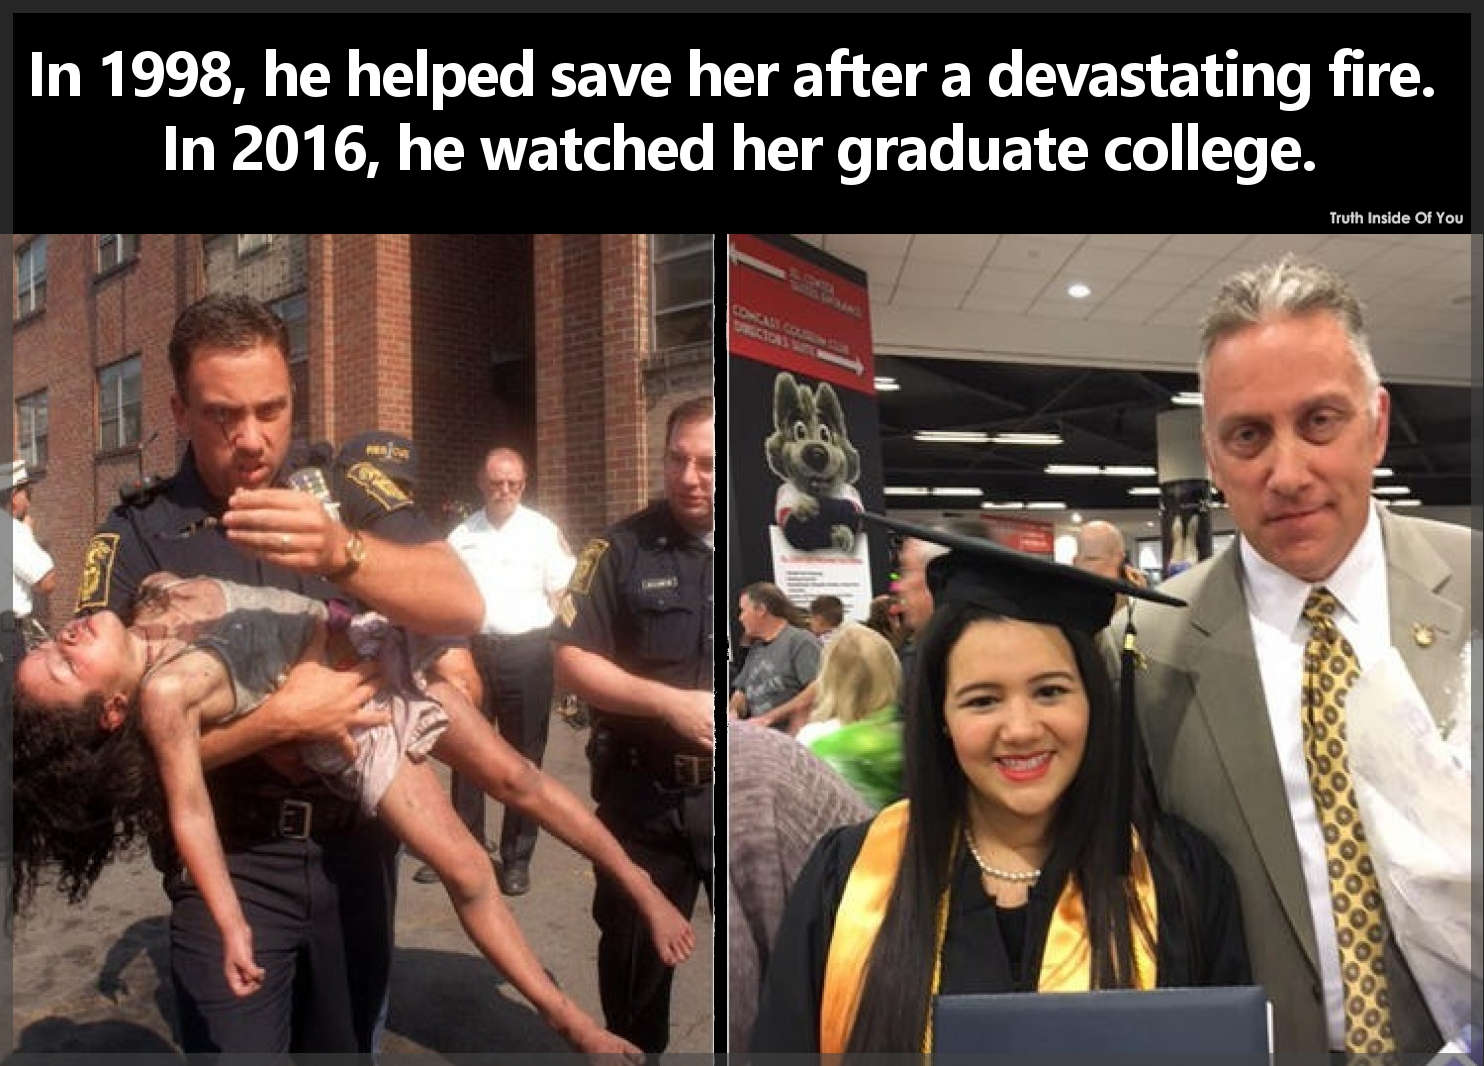 In 1998, he helped save her after a devastating fire. In 2016, he watched her graduate college.